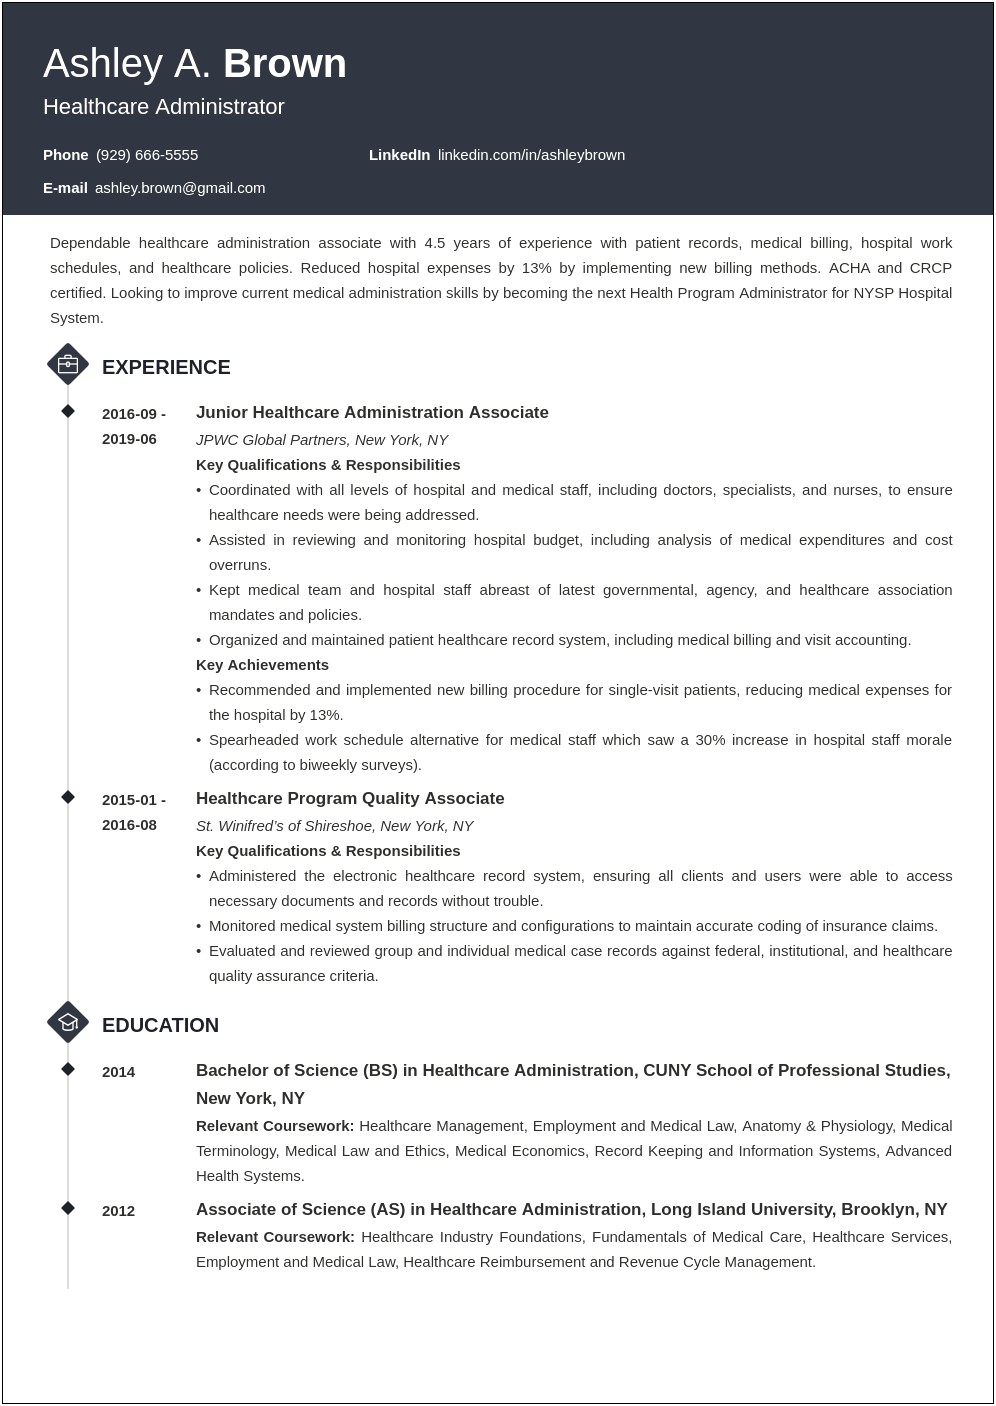 Resume Skills For Healthcare Related Jobs